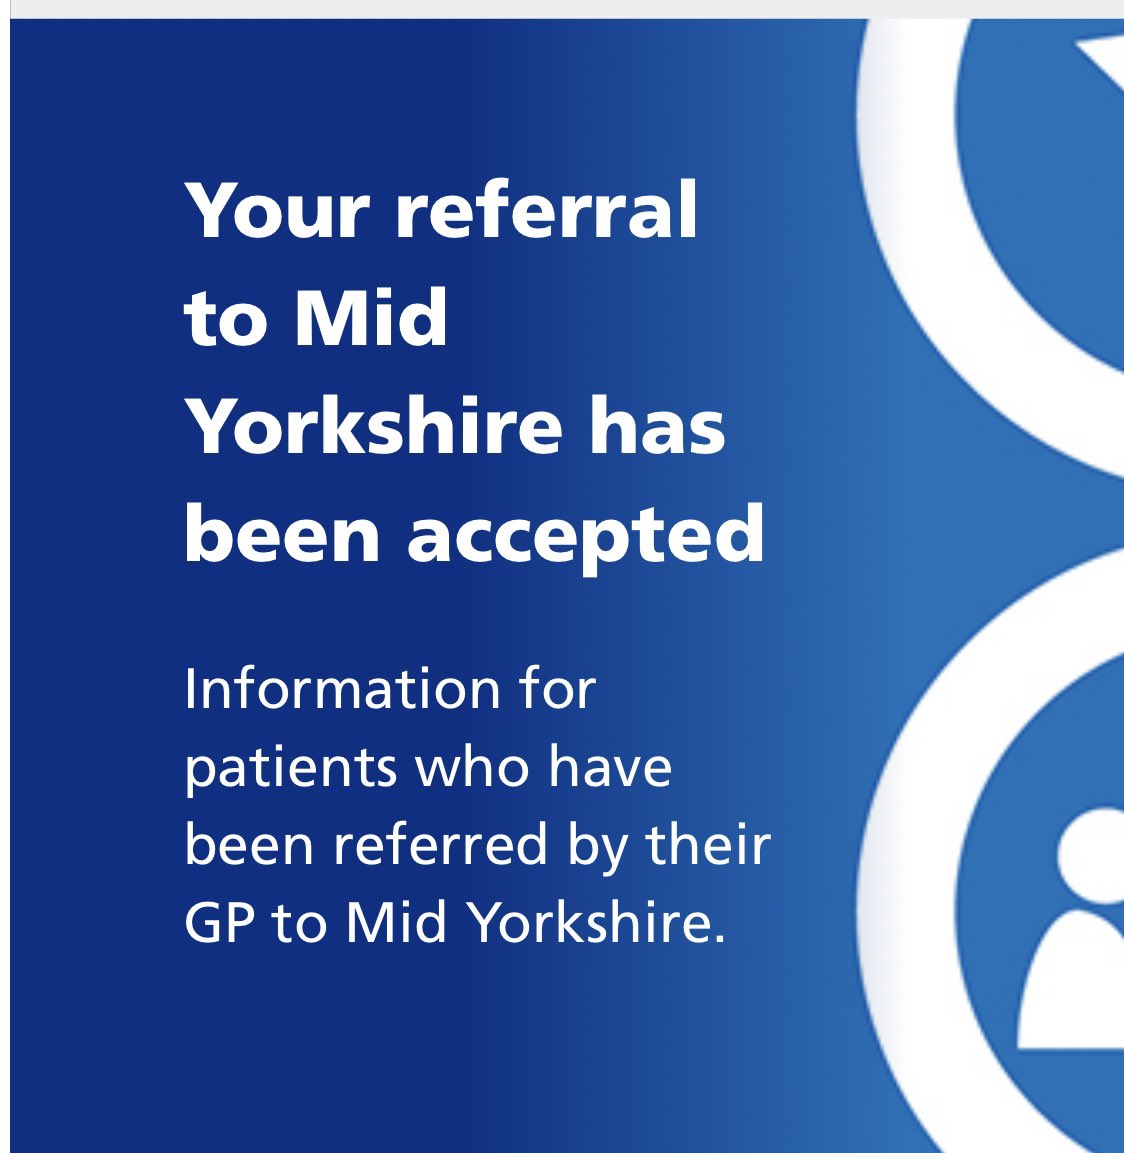 It’s coming … mid September ☺️ No more wondering, worrying or checking if your referral from a GP has been accepted by the Mid Yorkshire Hospitals… You’ll be sent notification from the hospital and information on how to prepare for you appointment. ☑️ #BetterCommunication